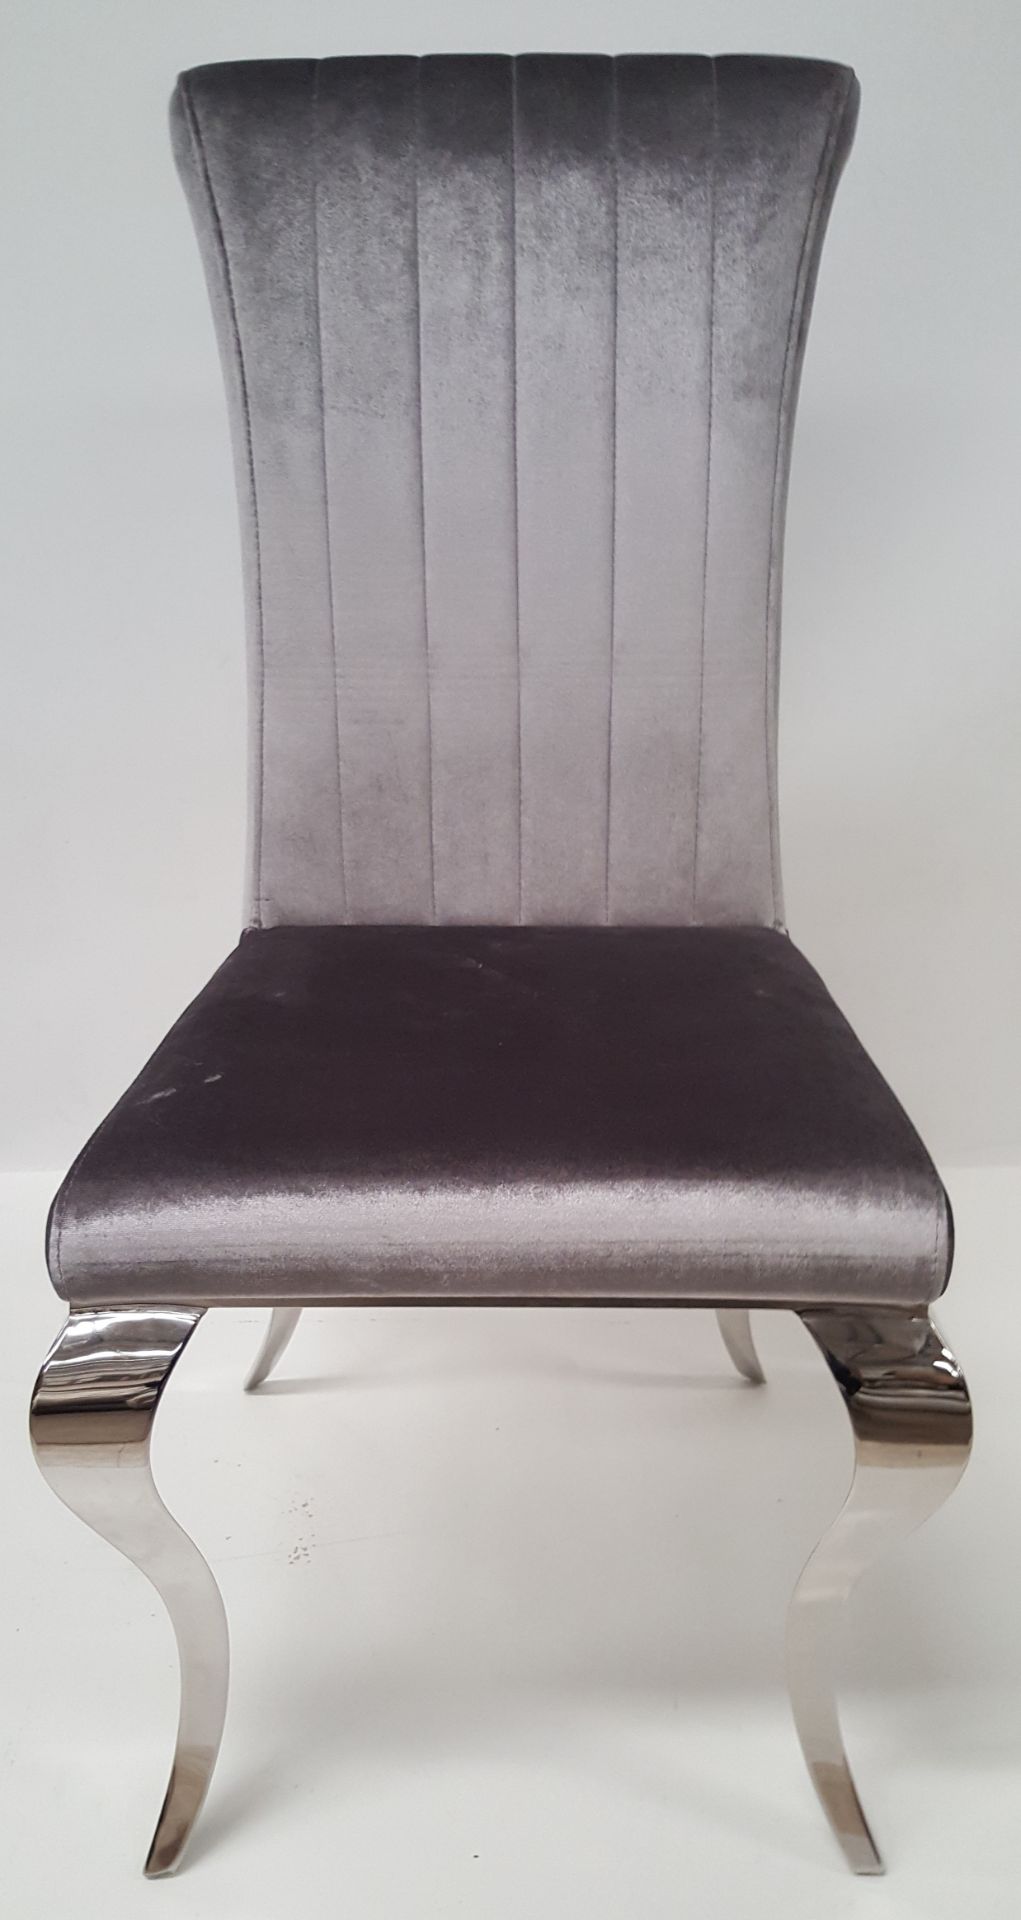 4 x STYLISH SILVER PLUSH VELOUR DRESSING/DINING TABLE CHAIRS - CL408 - Location: Altrincham WA14 - Image 6 of 7